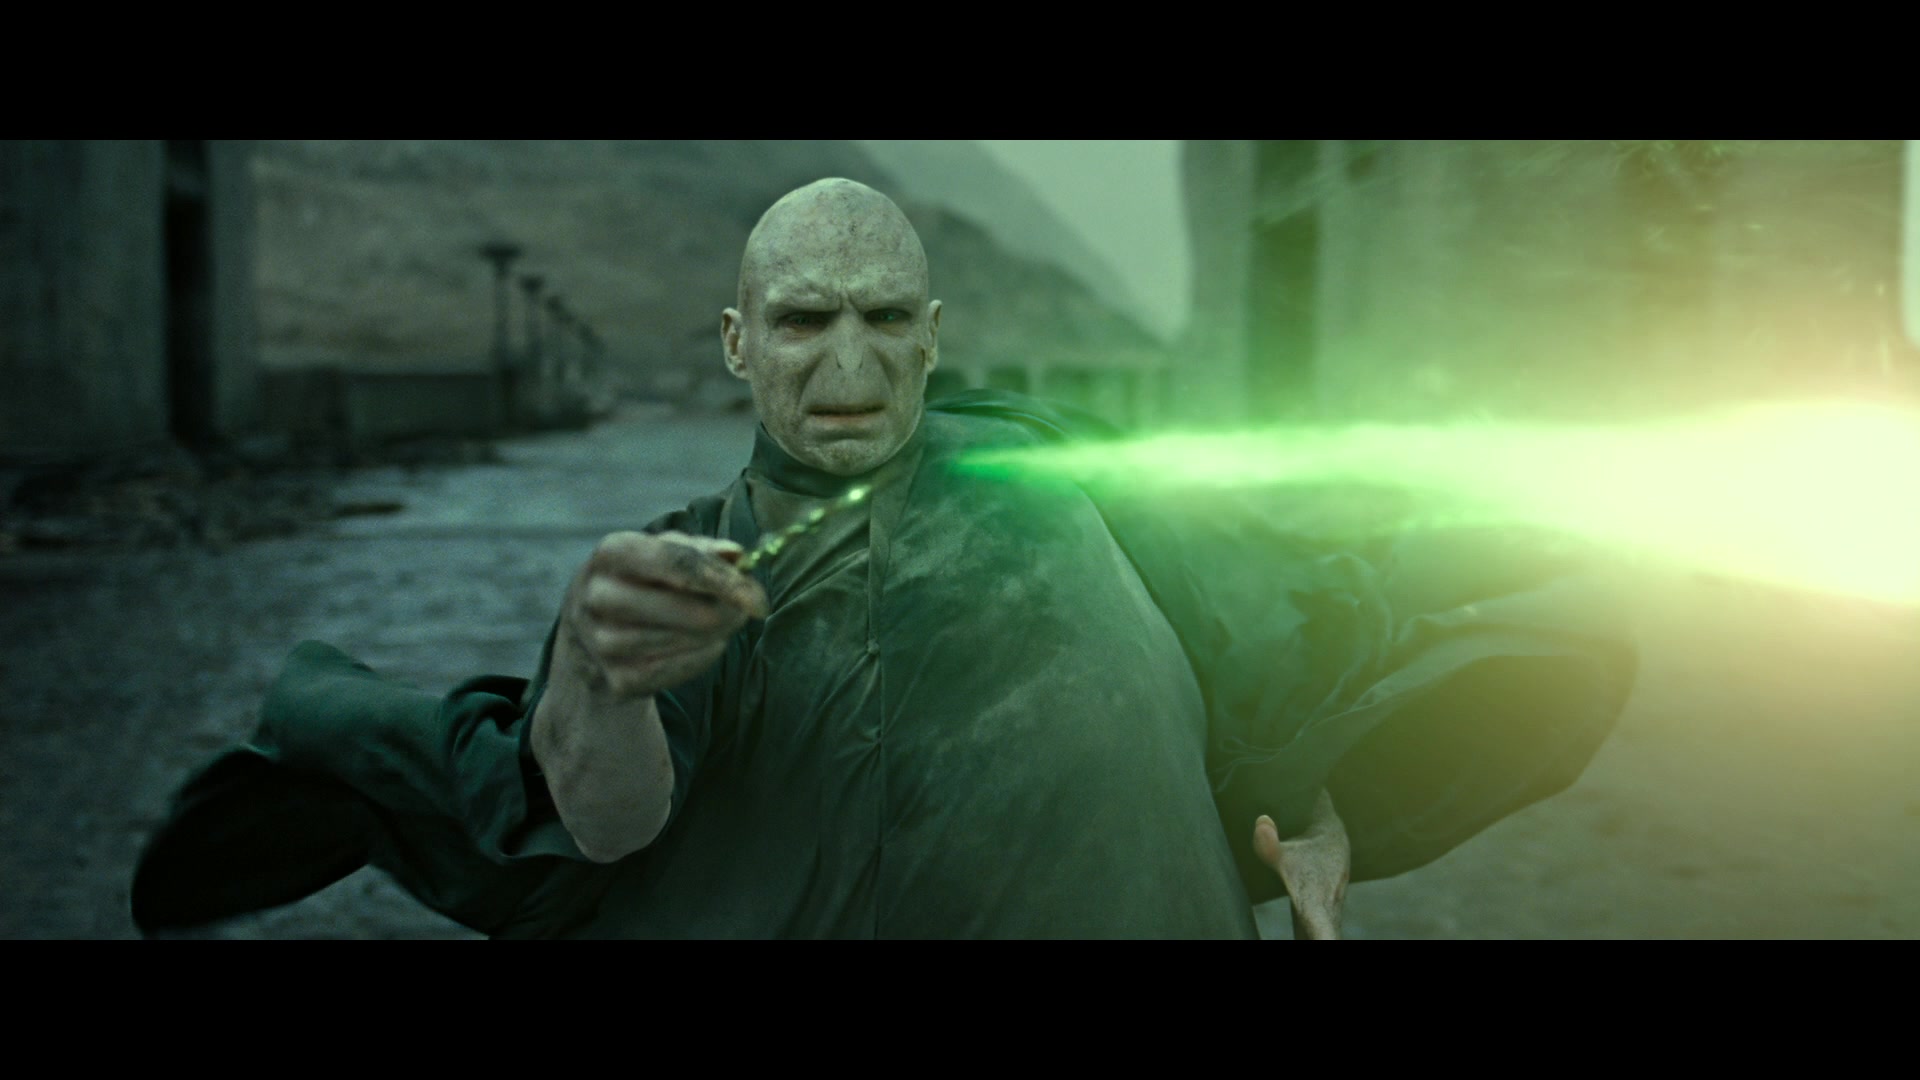 Lord Voldemort (Ralph Fiennes) strikes out at Harry Potter (Daniel Radcliffe) in Harry Potter and the Deathly Hallows - Part 2 (2010), Warner Bros. Pictures